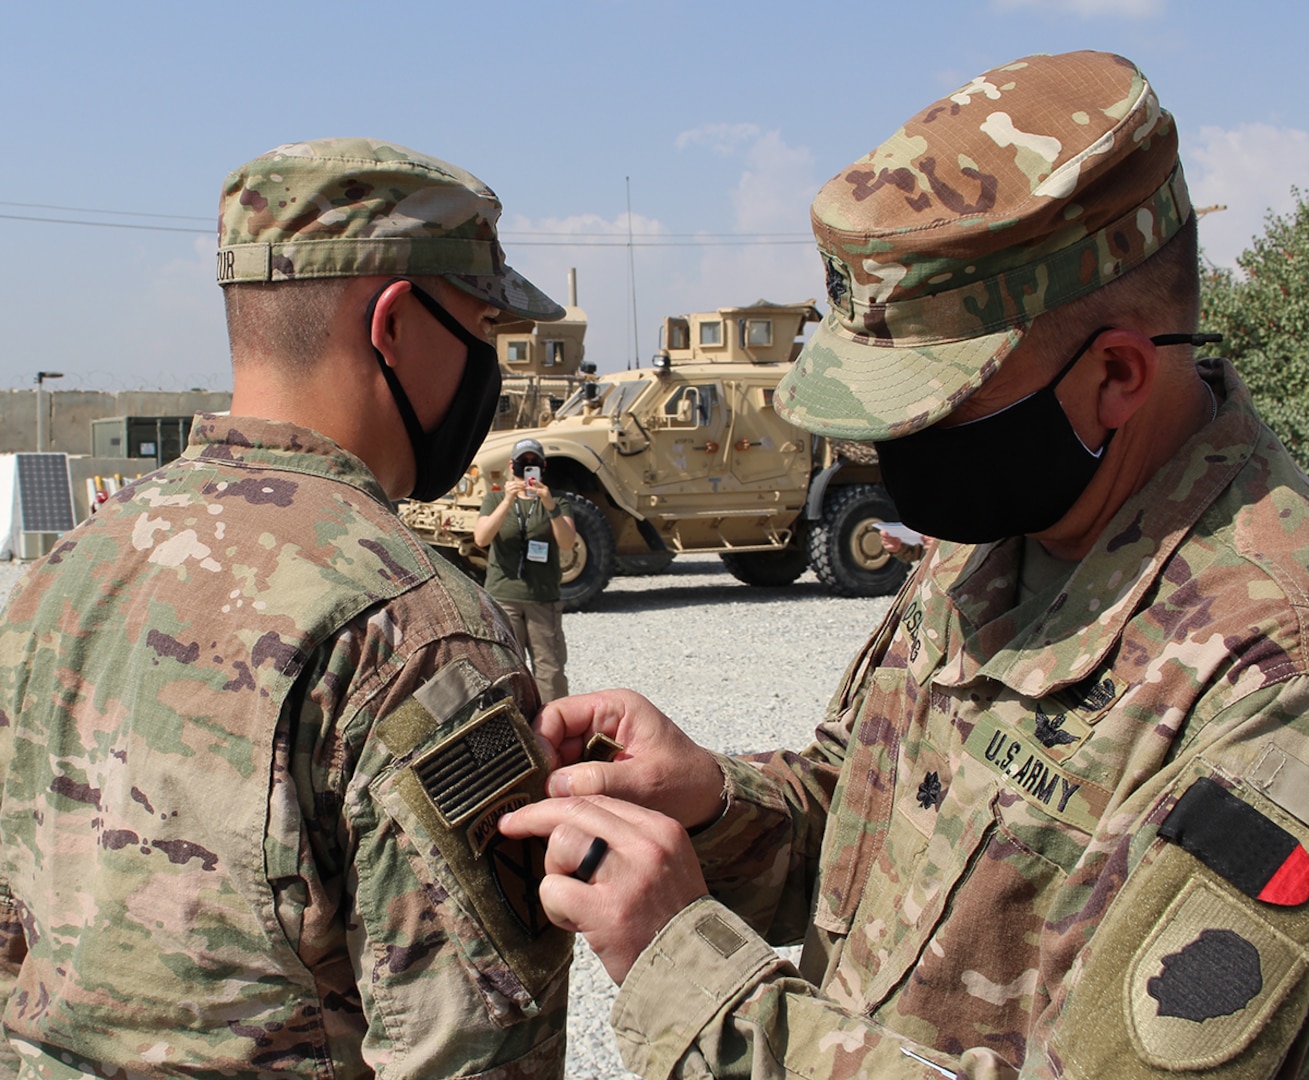 Lt. Col. Jason Osberg, of Champaign, Illinois, Commander, Bilateral Embedded Staff Team A25, presents 1st Lt. Kurt Kuzur, of Tinley Park, Illinois, with his combat patch during the recent ceremony.